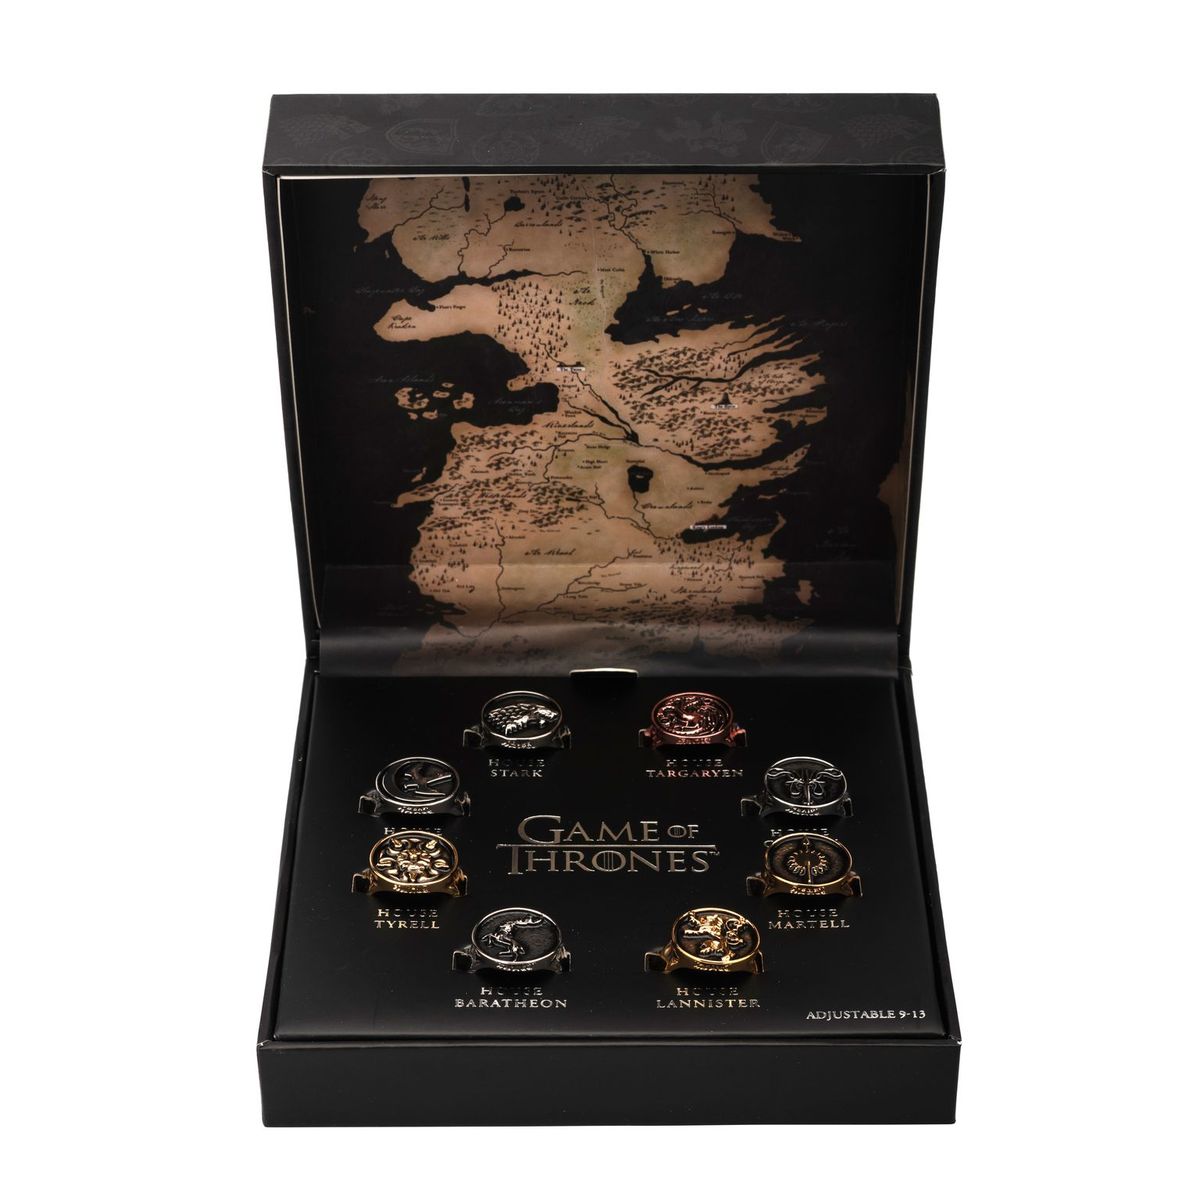 Get Your Hands on these Westeros Rings!